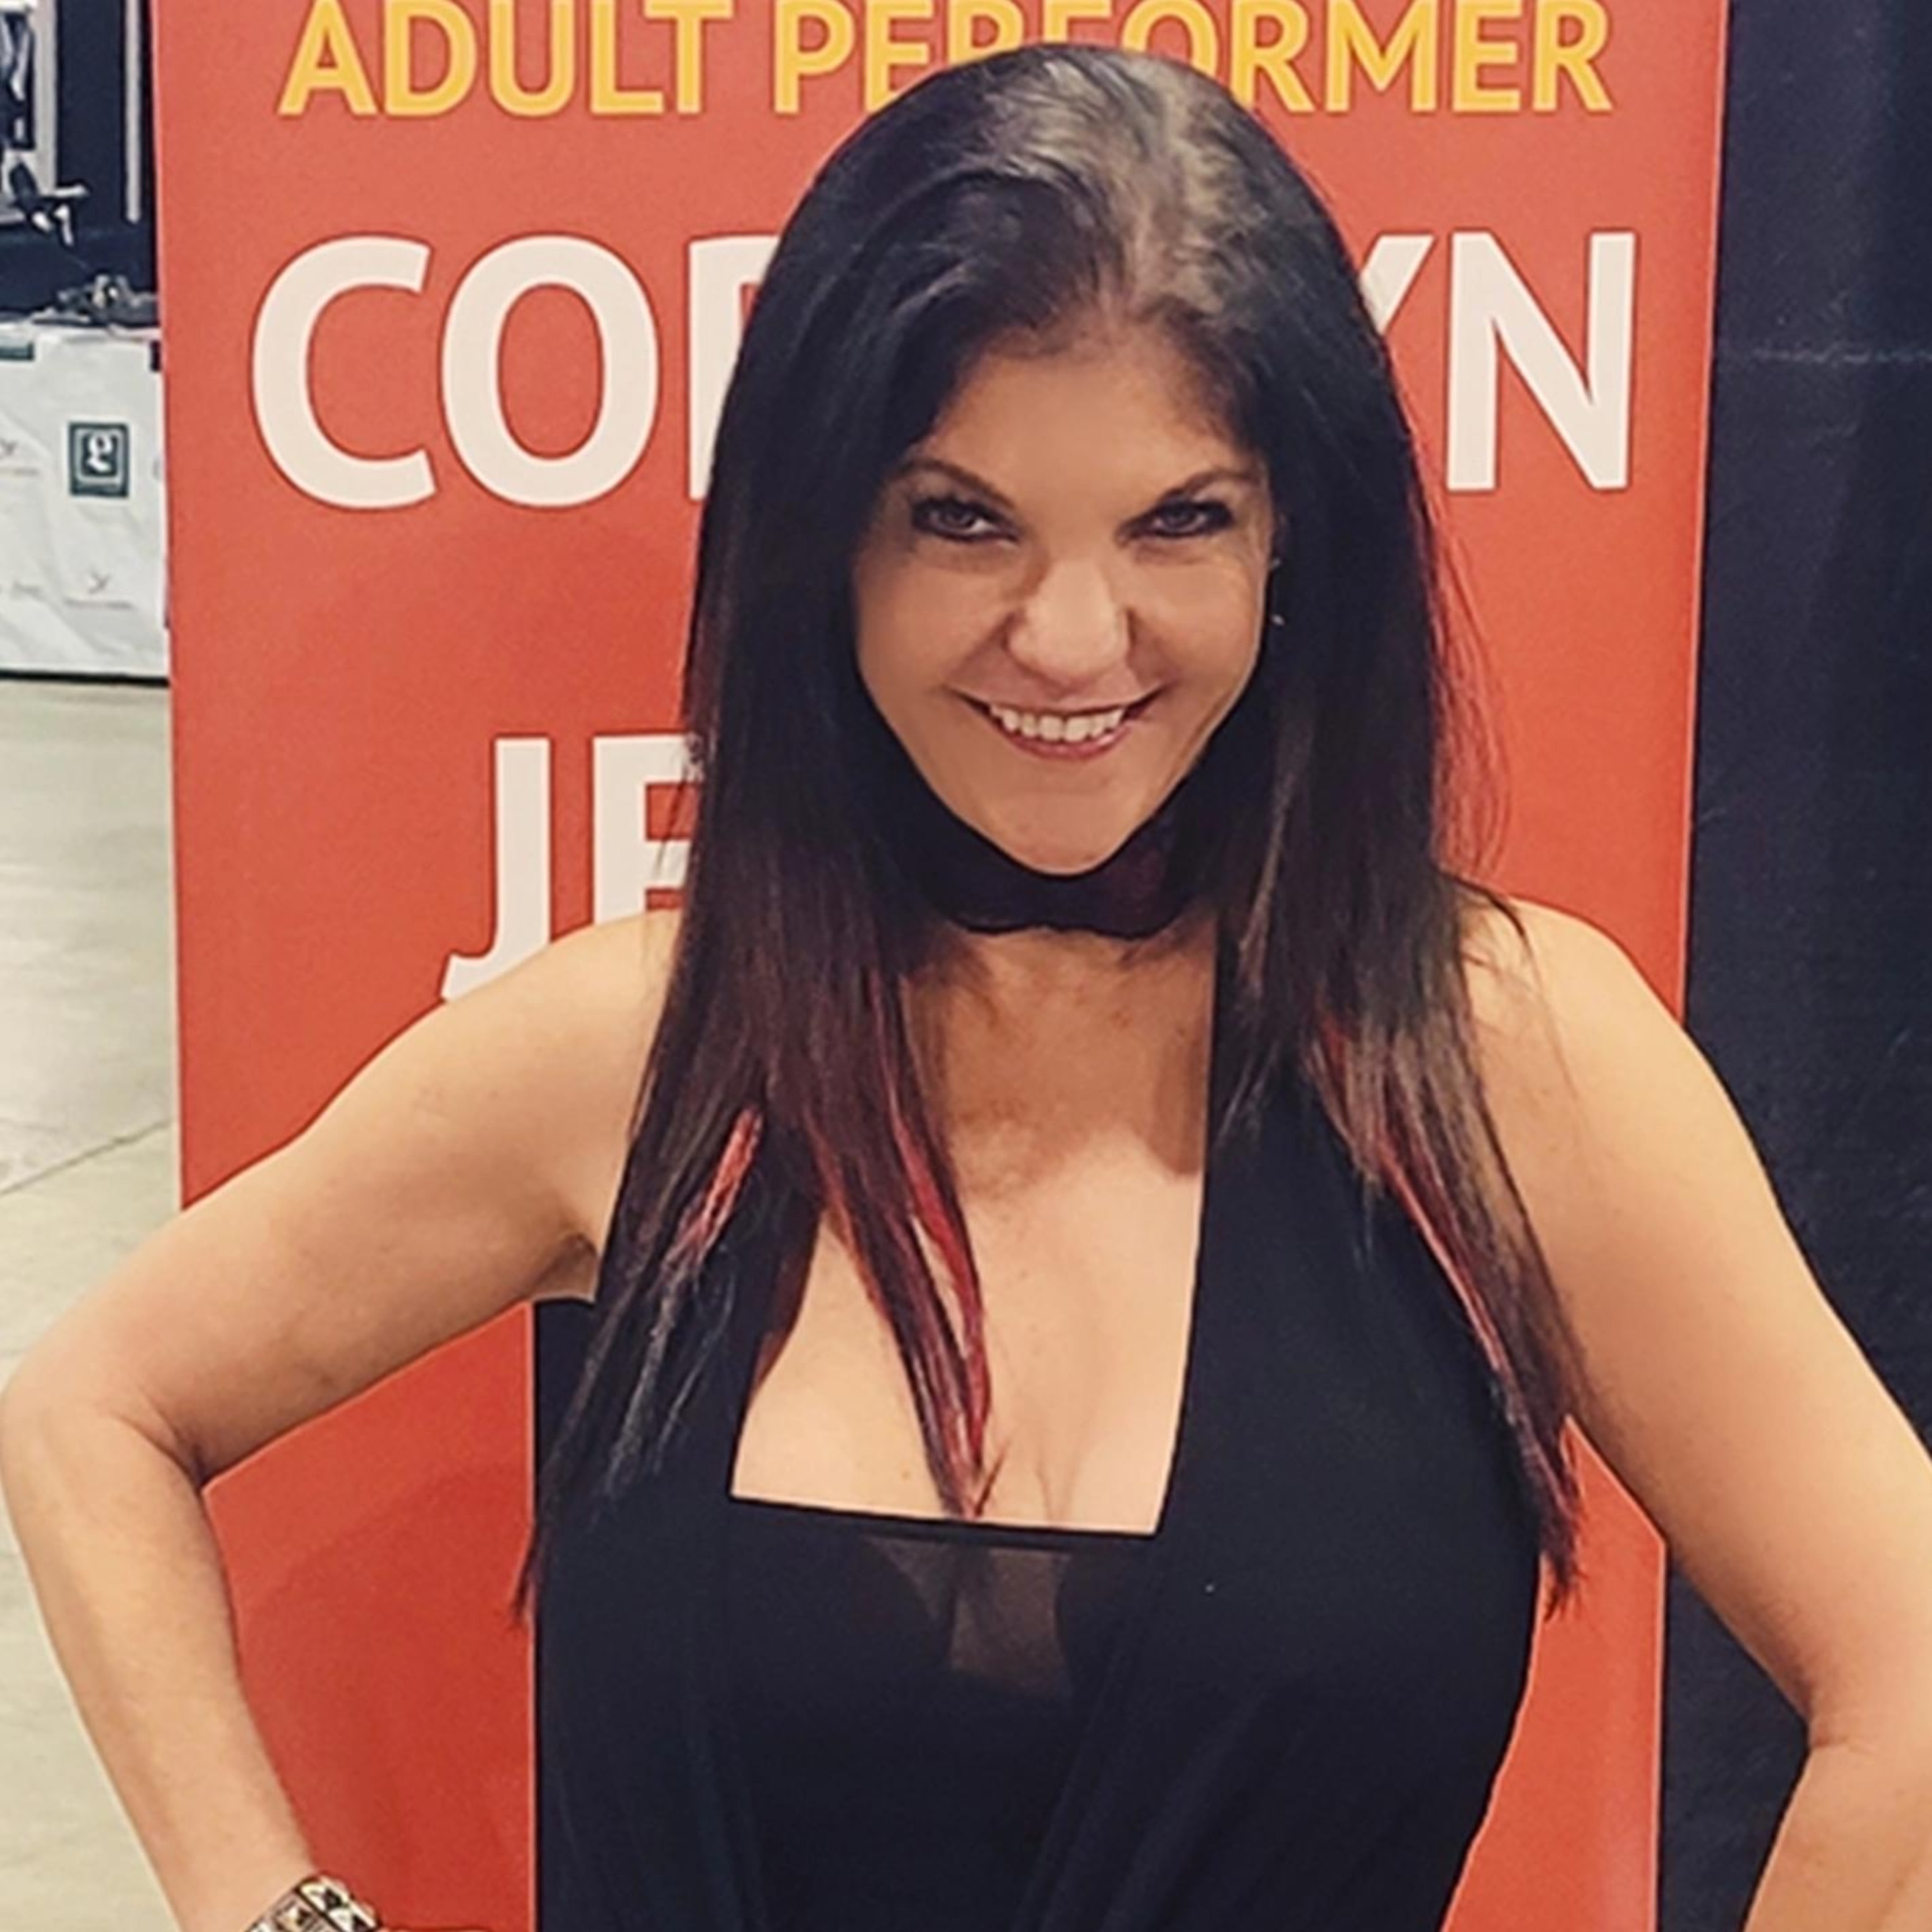 Adult Site Broker Talk Episode 119 With Coralyn Jewel